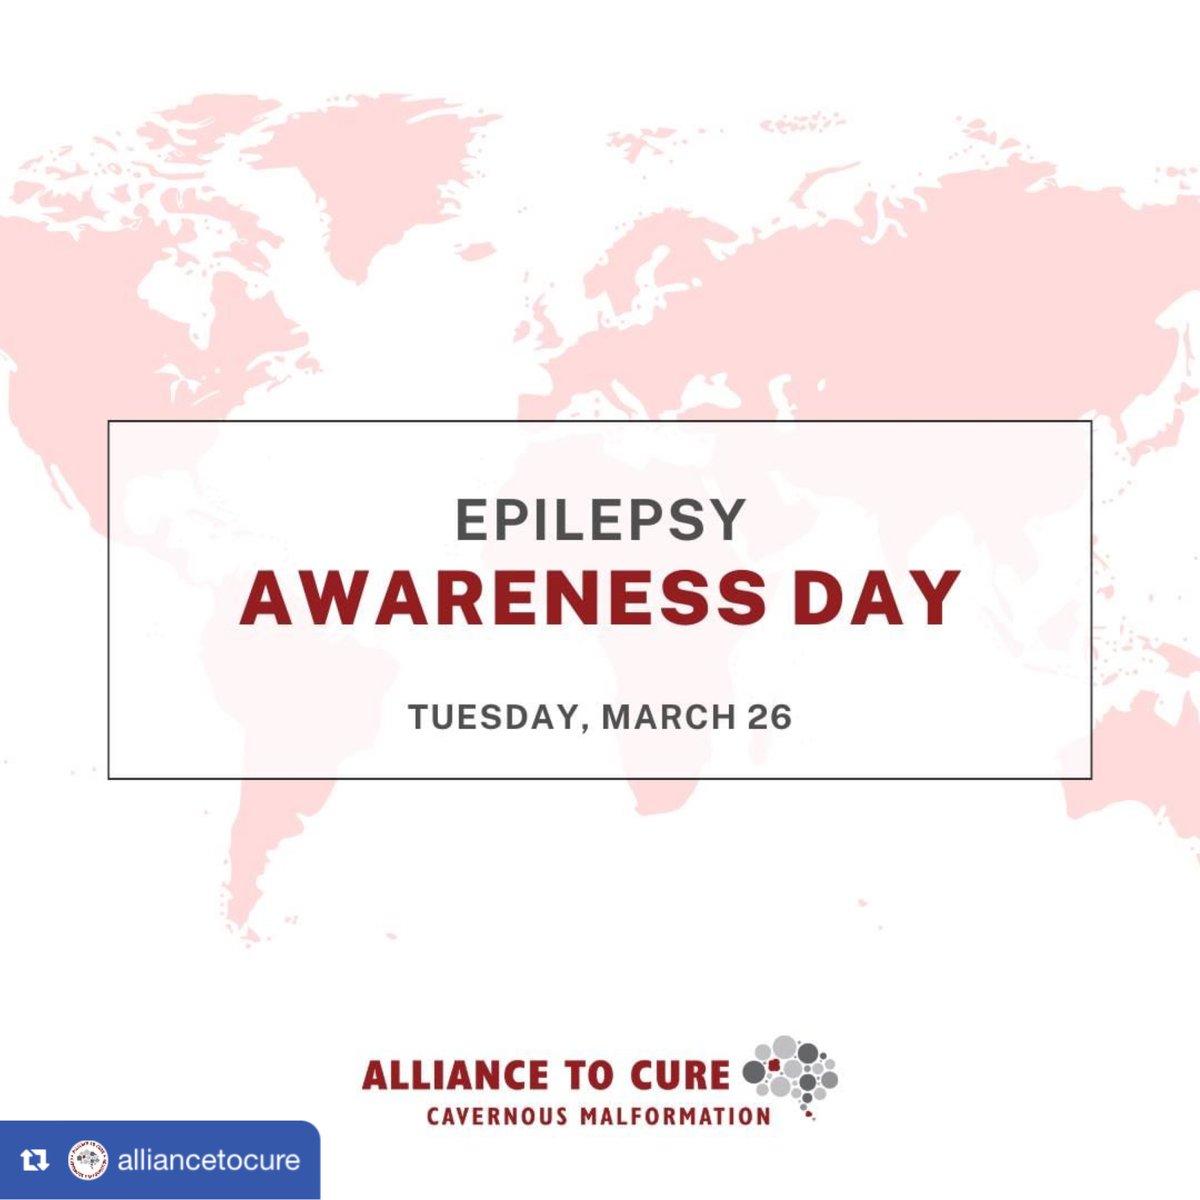 On Epilepsy Day, let's shine a light on the many brain conditions that can lead to epilepsy. It's crucial to raise awareness and bridge the gap in healthcare access for those affected, ensuring support reaches every corner of the globe. Wear purple to show support!